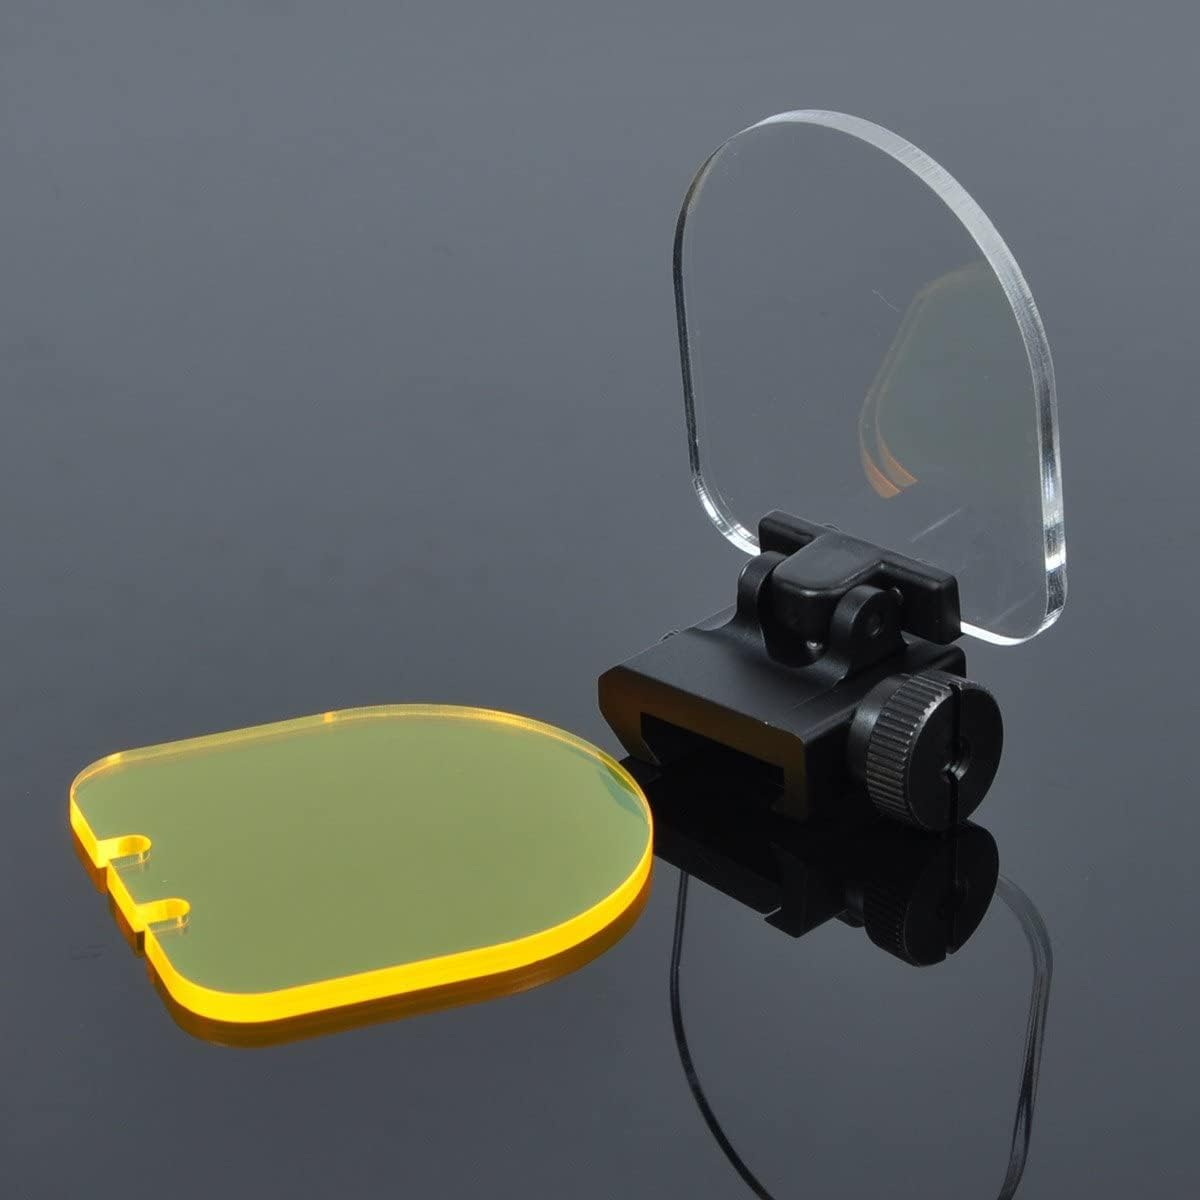 Hunting Scope Optic Foldable Lens Protector, Reflex Sight Scope Lens Shield Cover Type A - AmmoNook